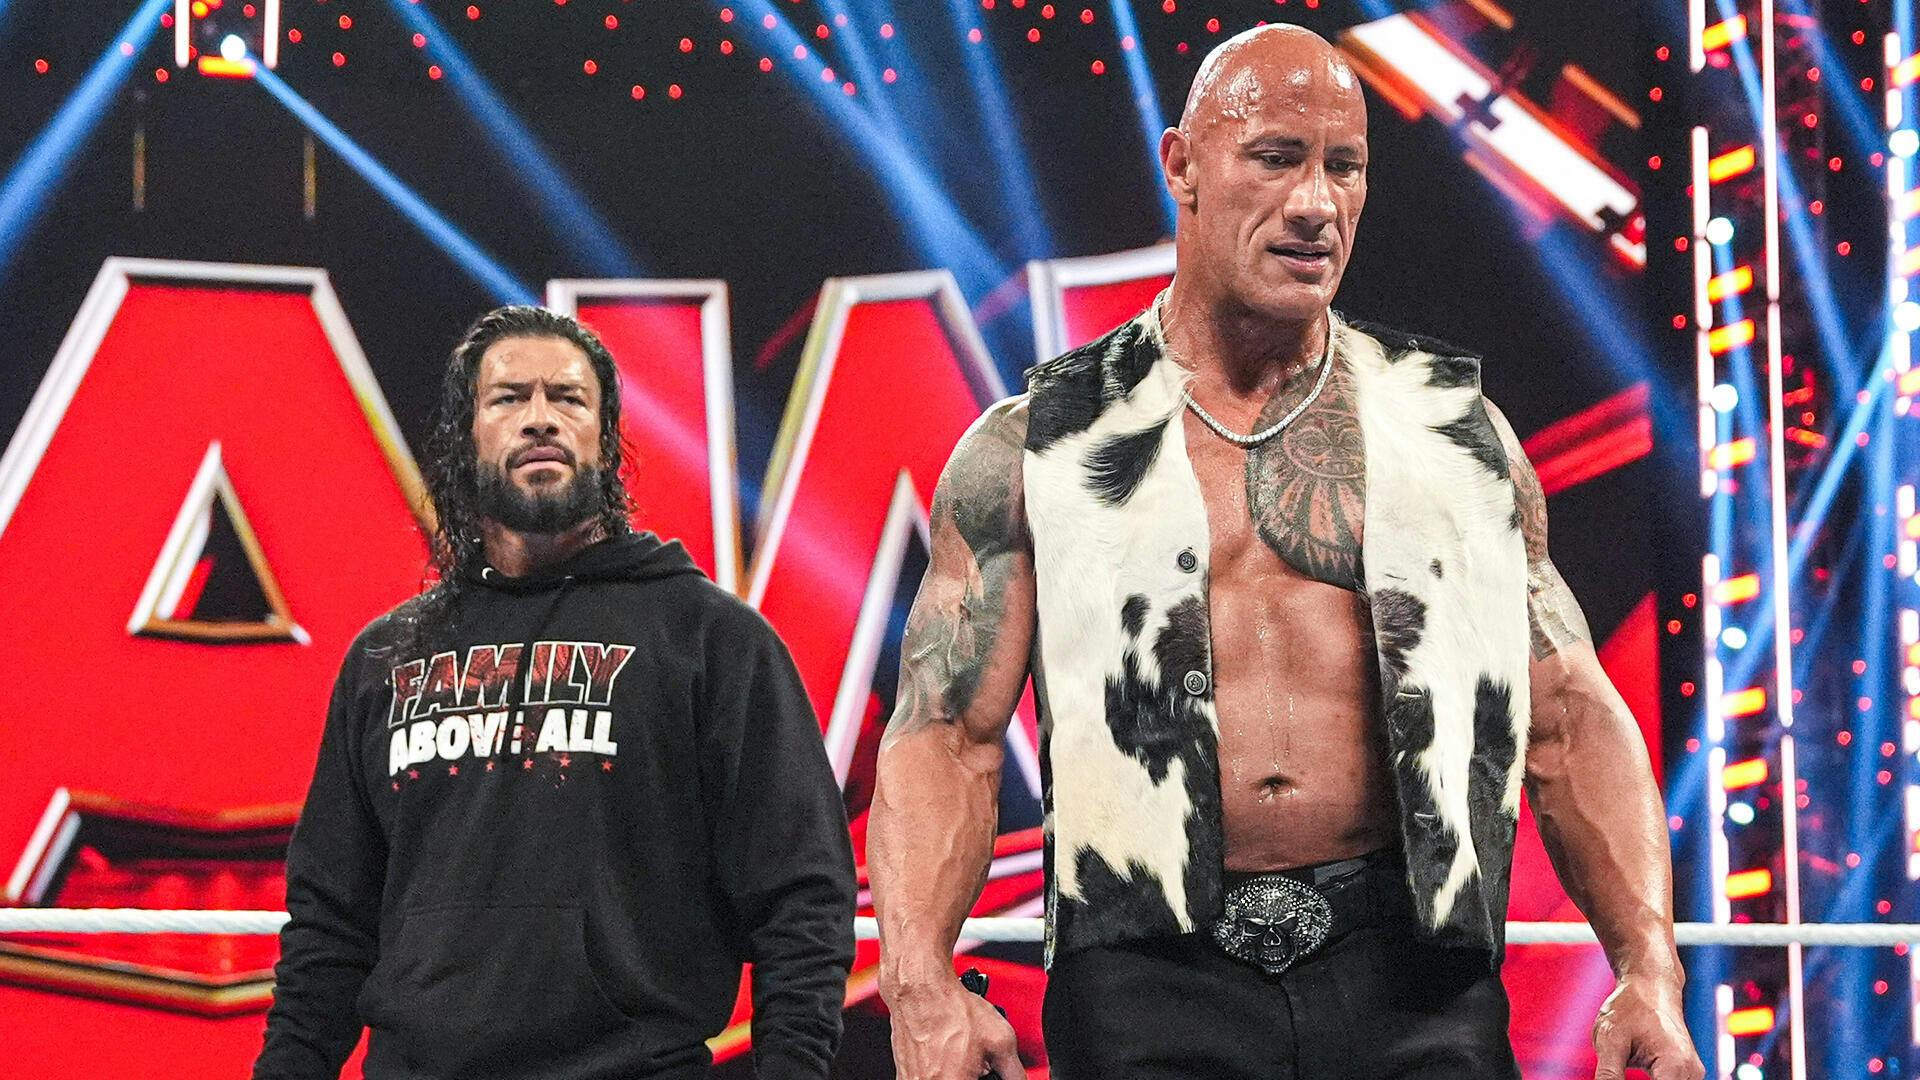 The Rock stars in all-important WrestleMania tag team match